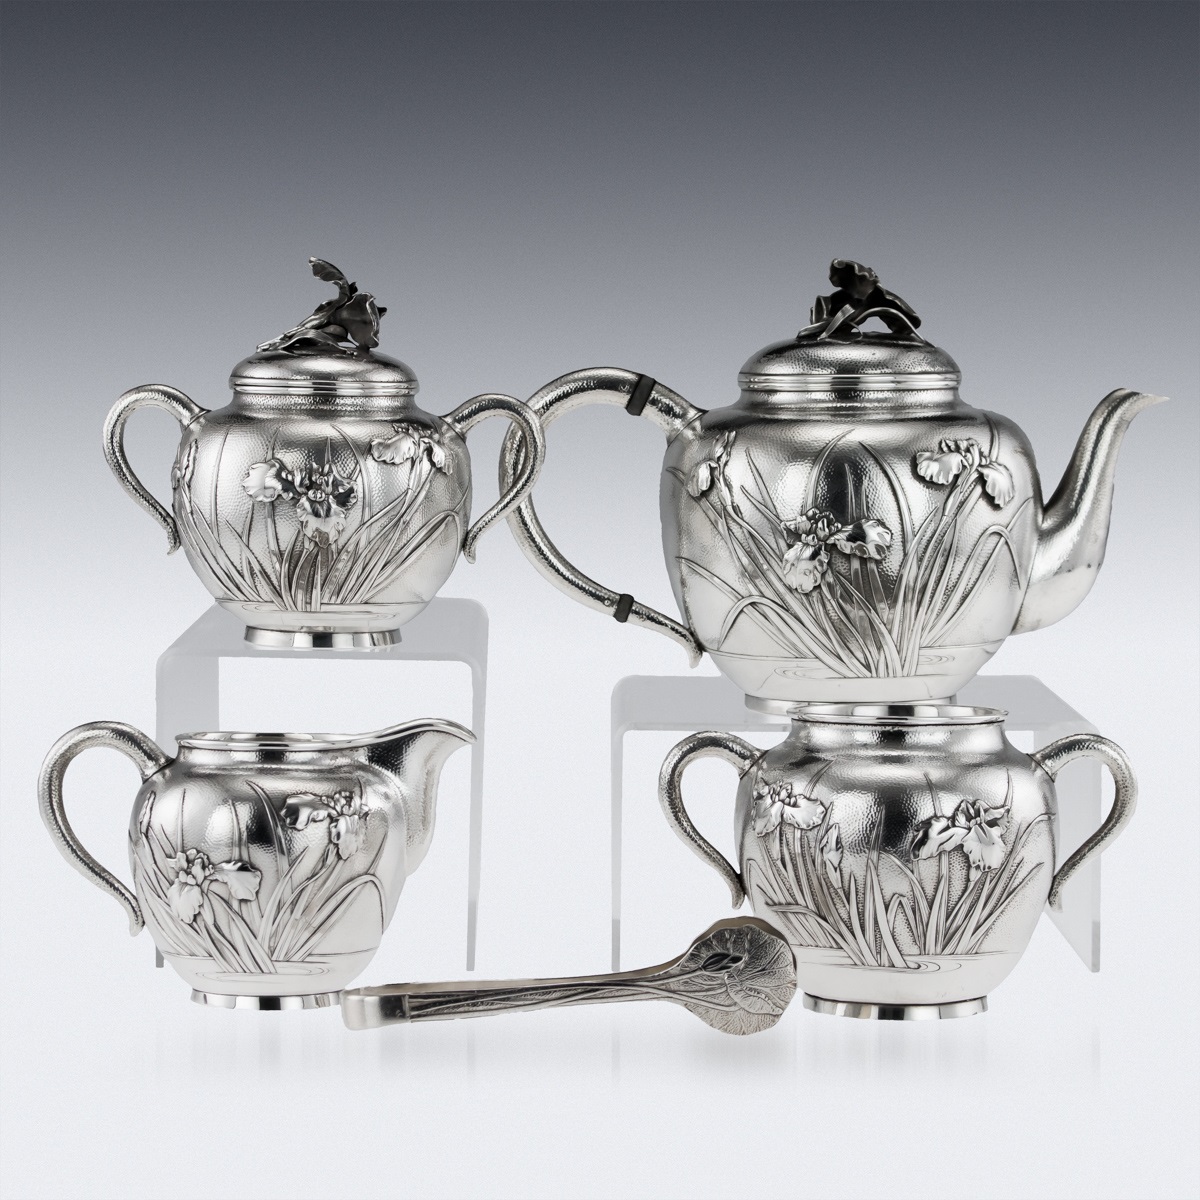 AN EXCEPTIONAL EARLY 20TH CENTURY JAPANESE SILVER TEA & COFFEE SERVICE ON TRAY C. 1900 - Image 6 of 31